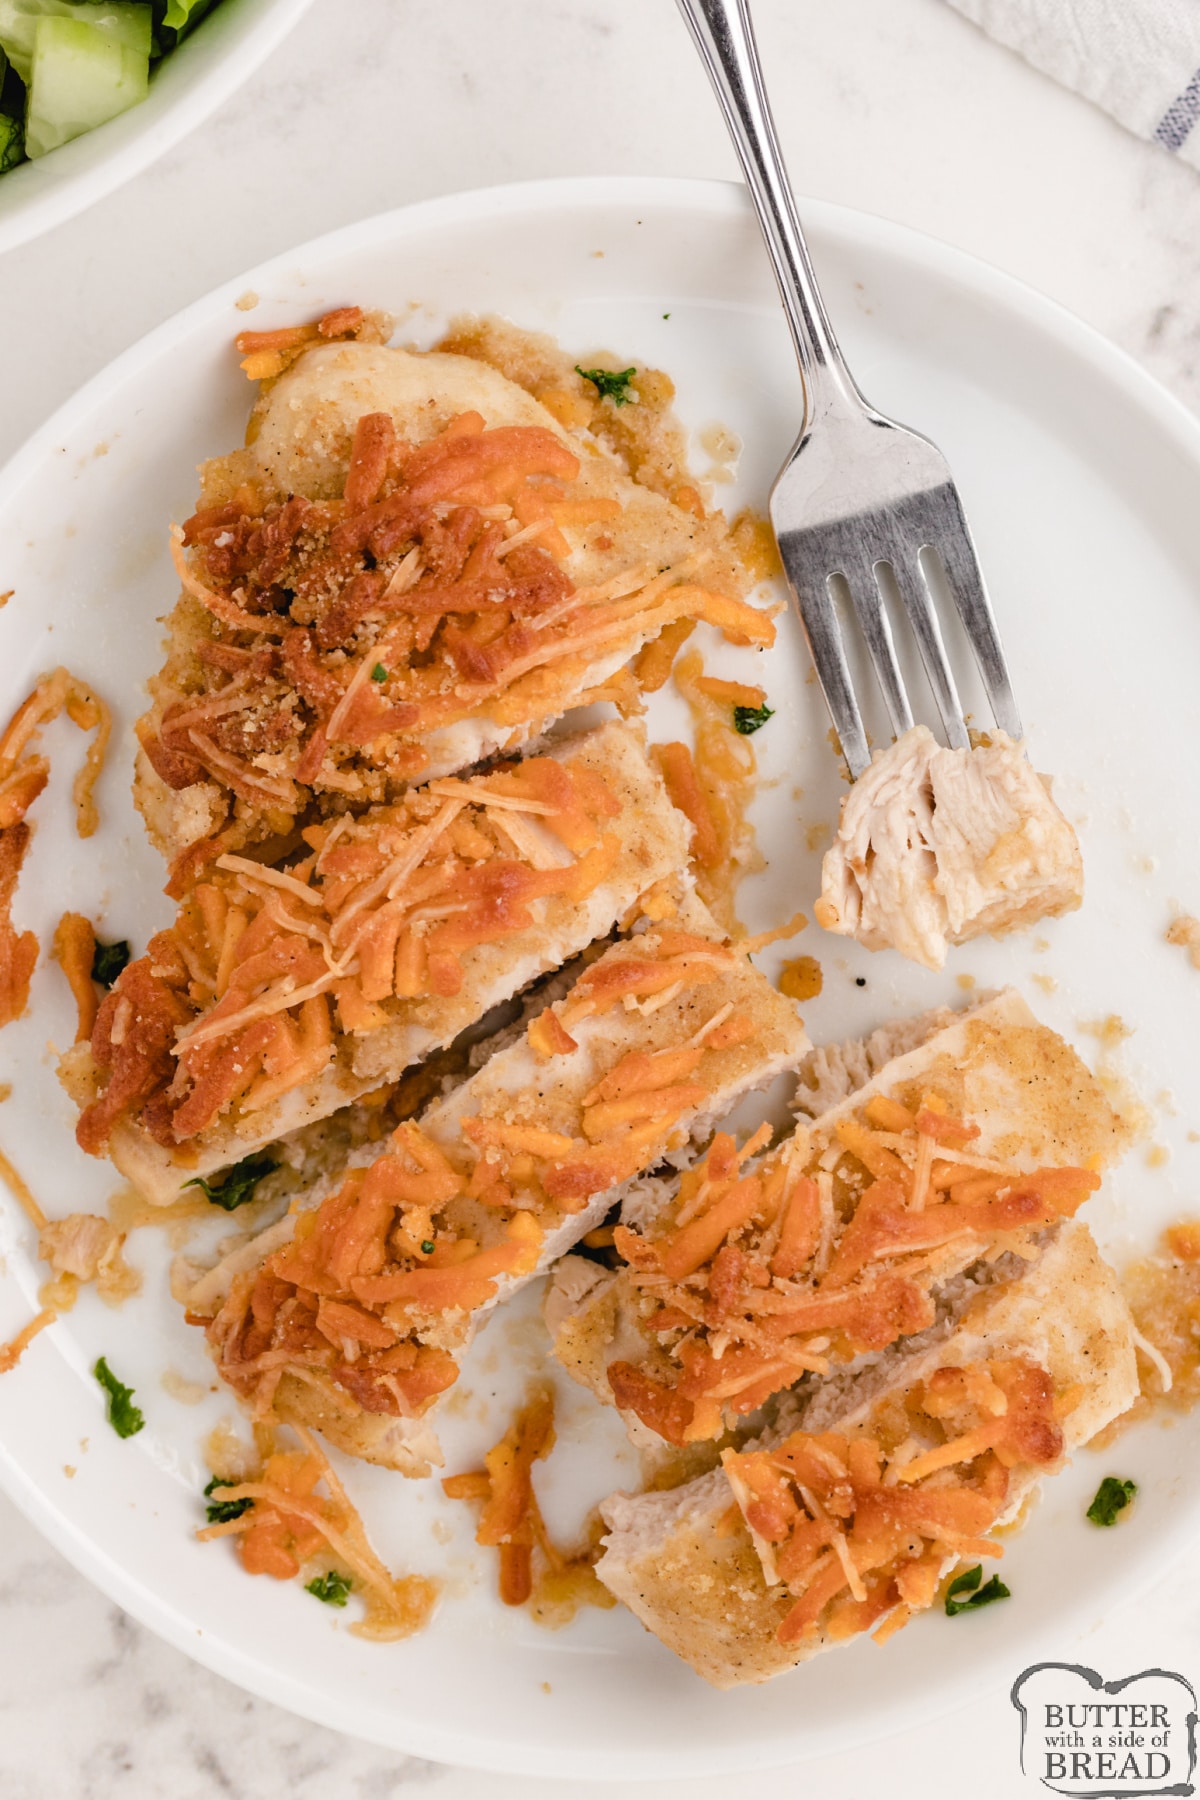 Baked chicken coated in cheese and bread crumbs